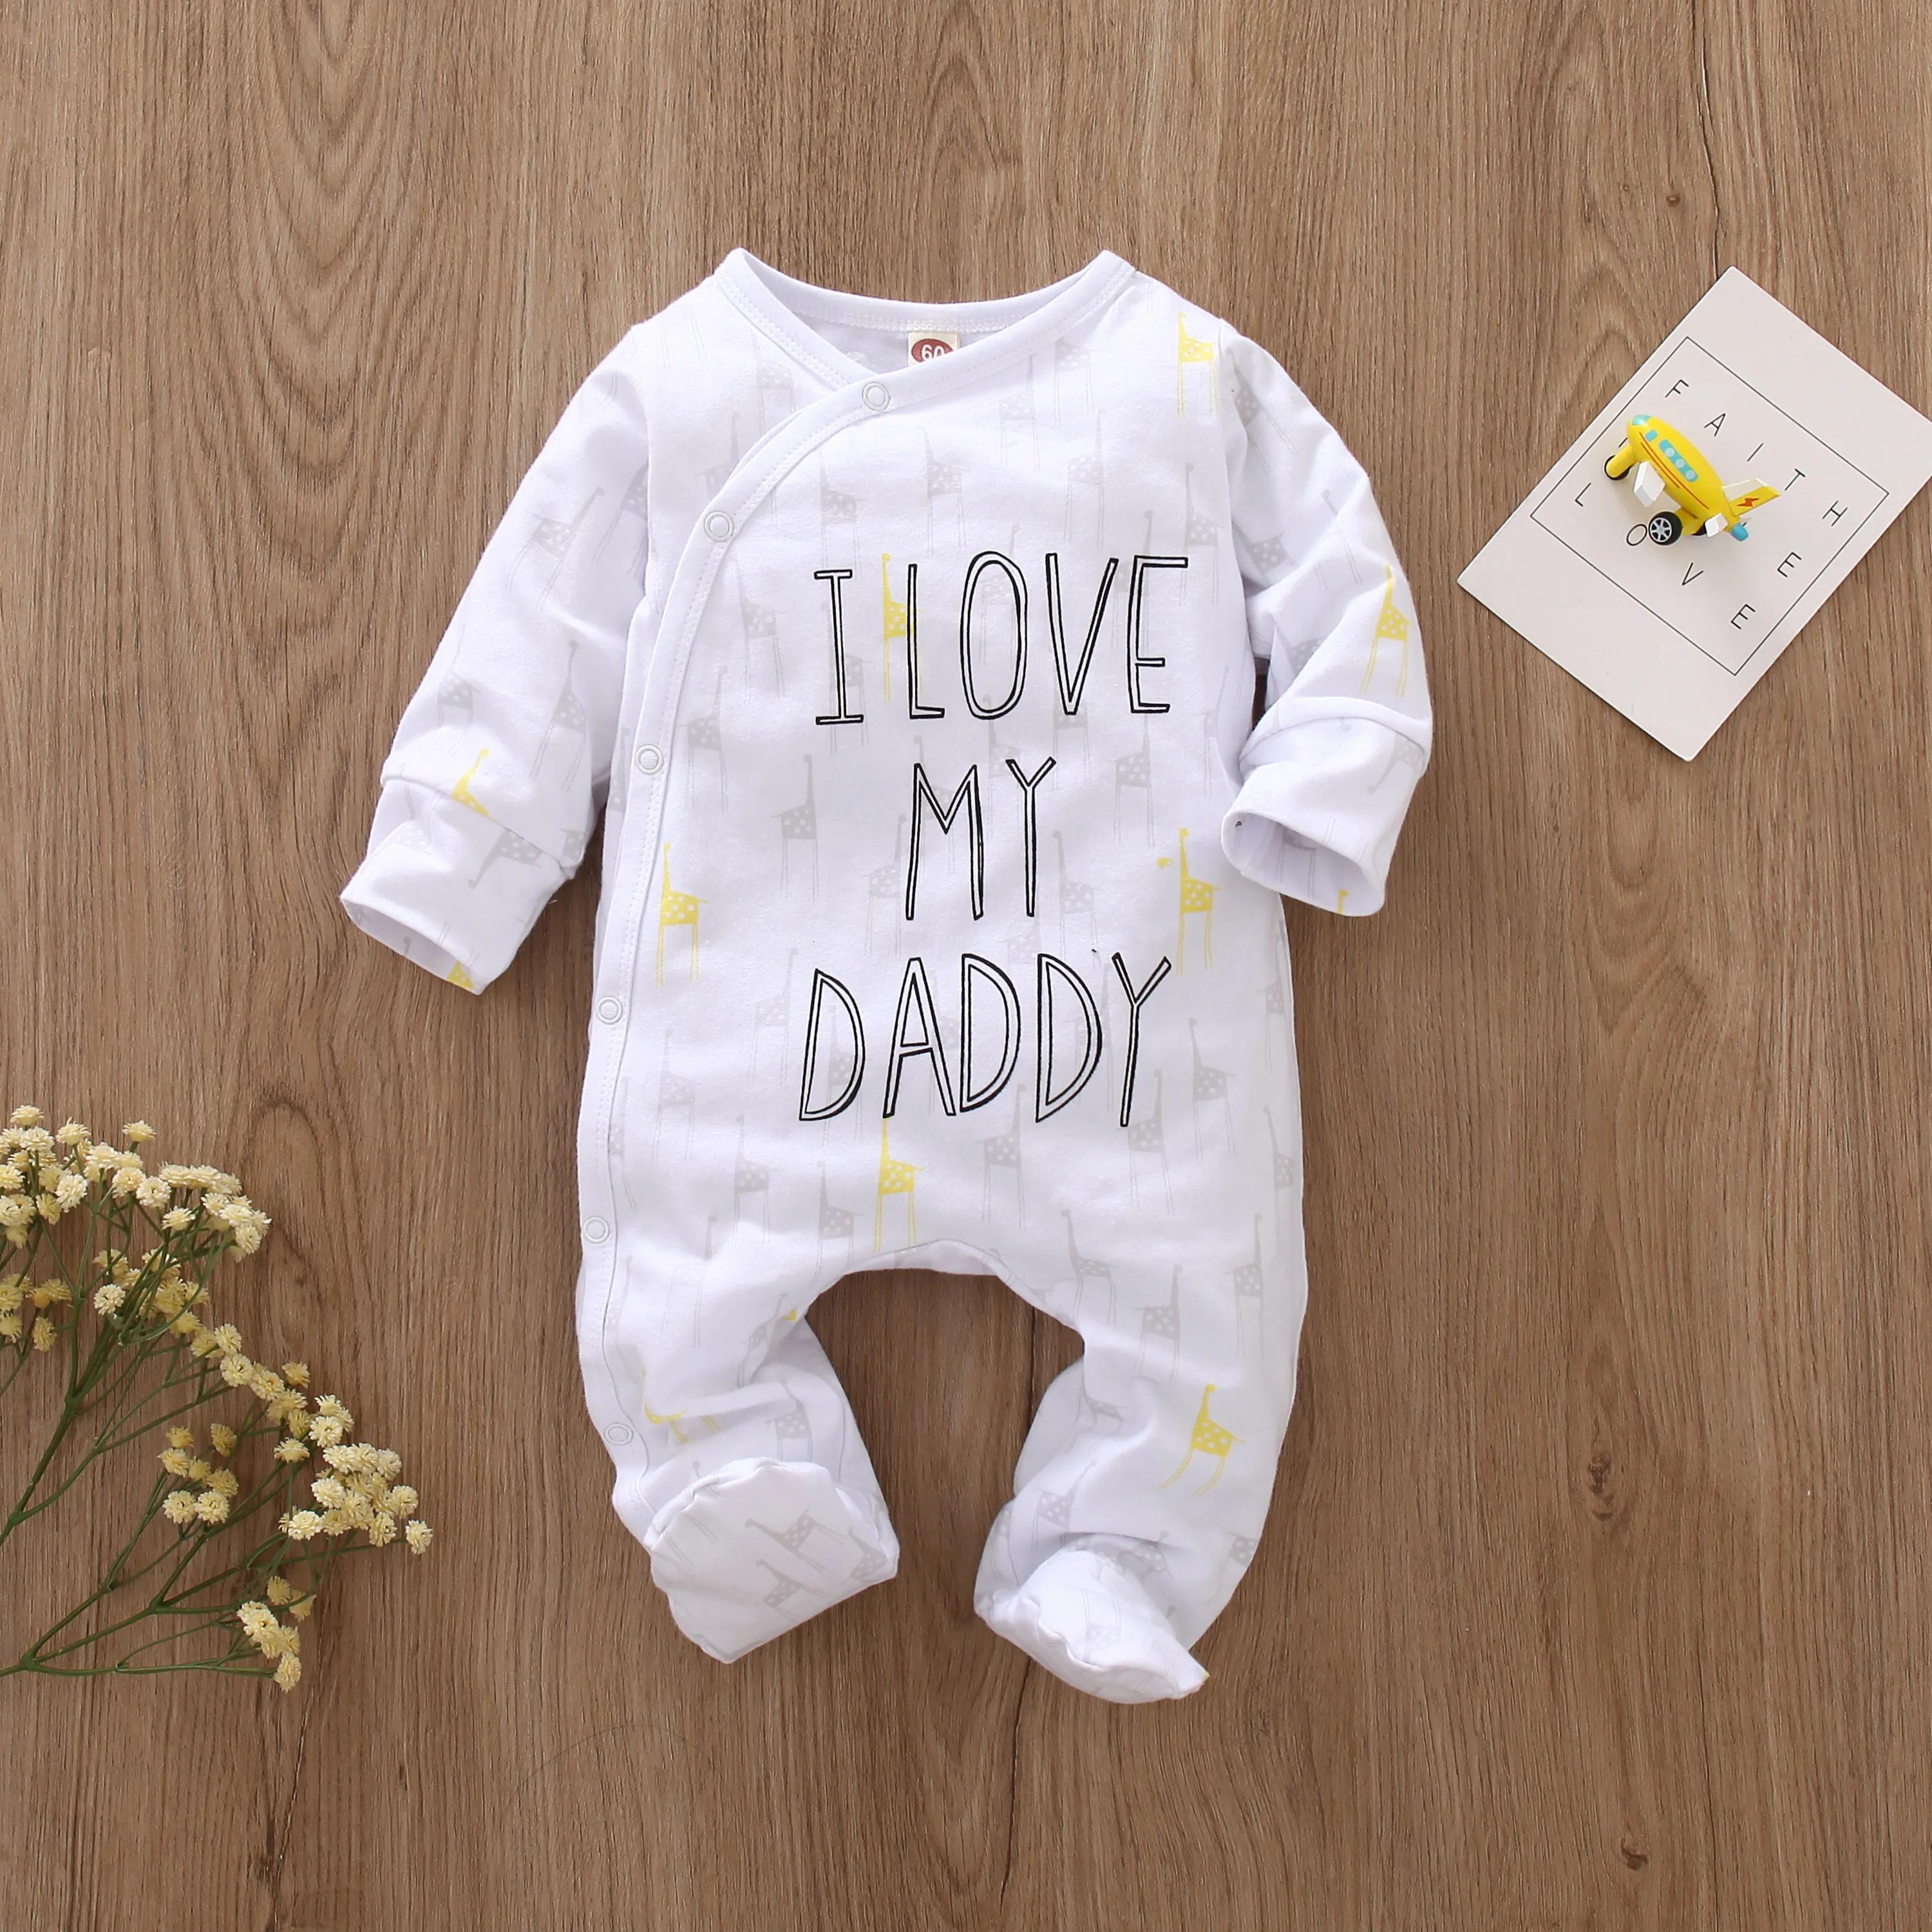 baby bodysuit dress Newborn Baby Boy Girl Romper Long Sleeve Cotton Letter I Love Daddy & Mummy Animal Print Jumpsuit Infant Pajama Outfits Bamboo fiber children's clothes